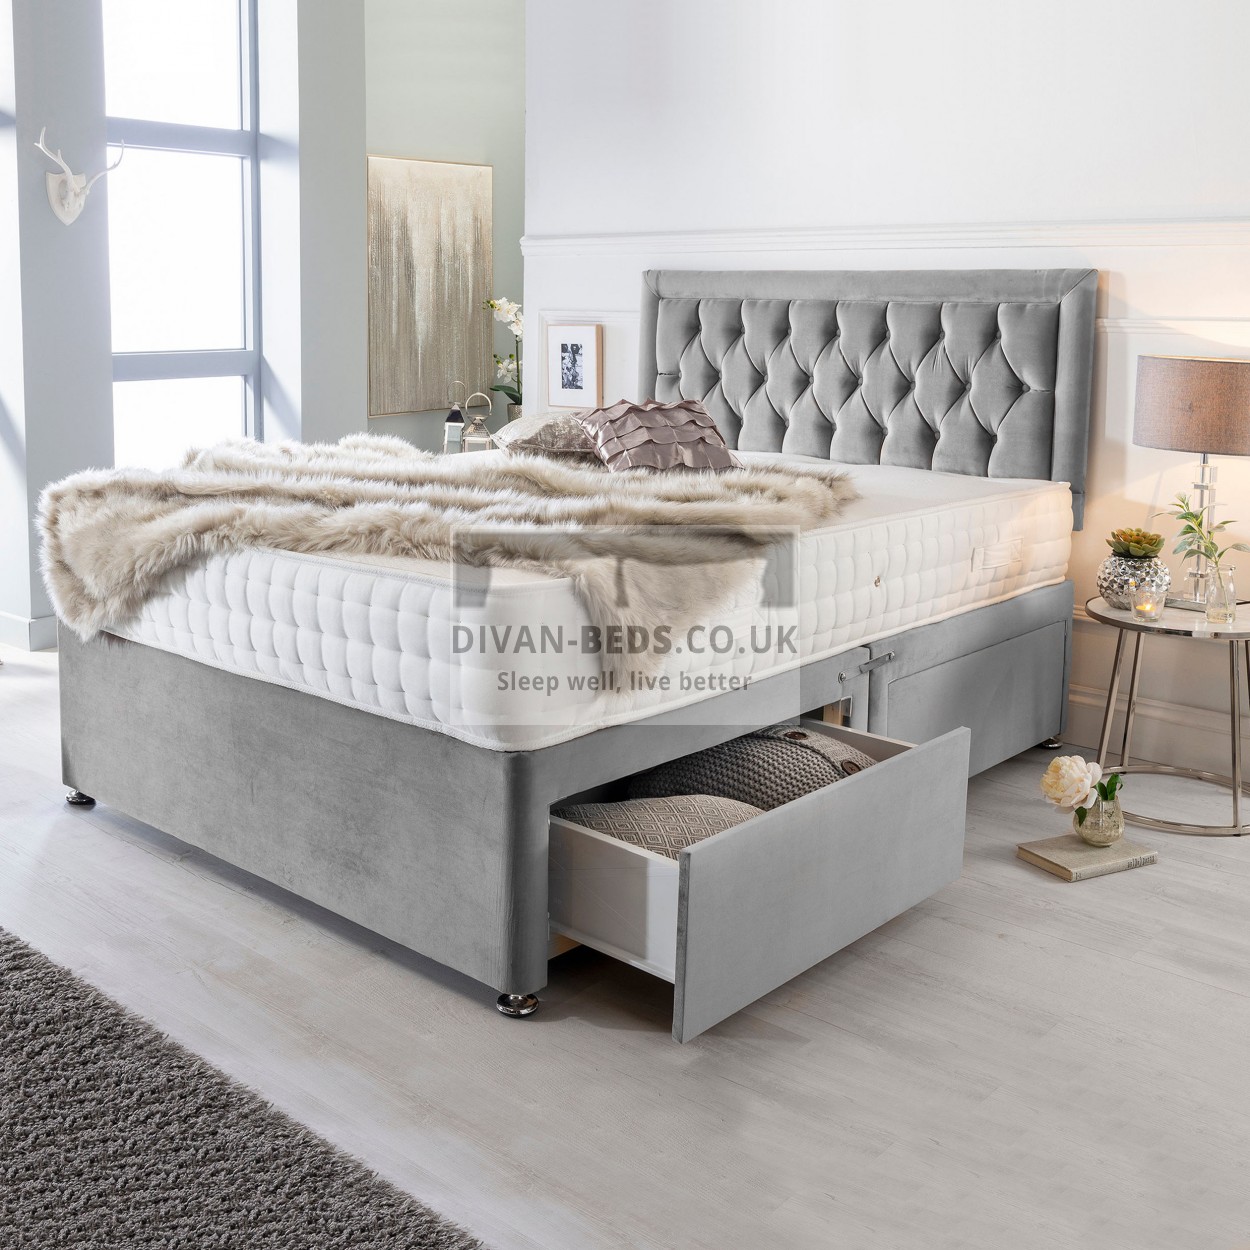 3FT - 2 Drawers Winsor Bed Set with Quilted Othopedic Mattress and Leather Headboard 